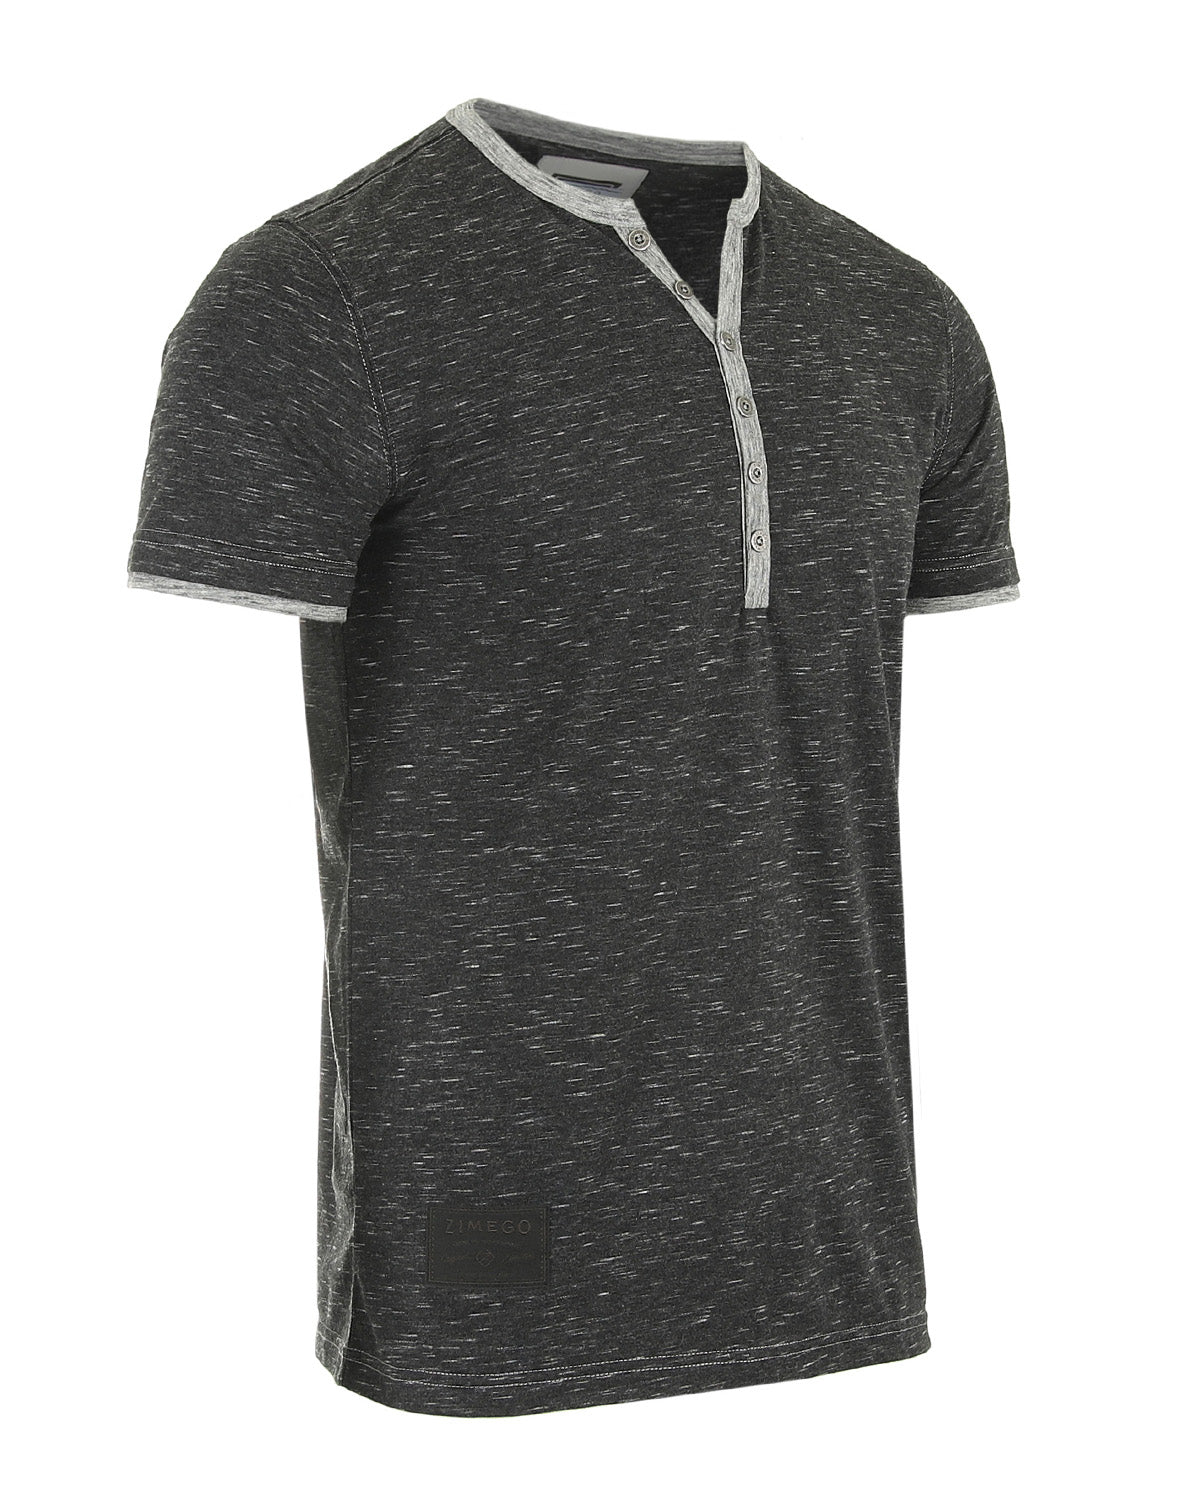 Men's Henley T Shirts – Short Sleeve Contrast Neck and Hem Active Casual Fashion Tees Tops